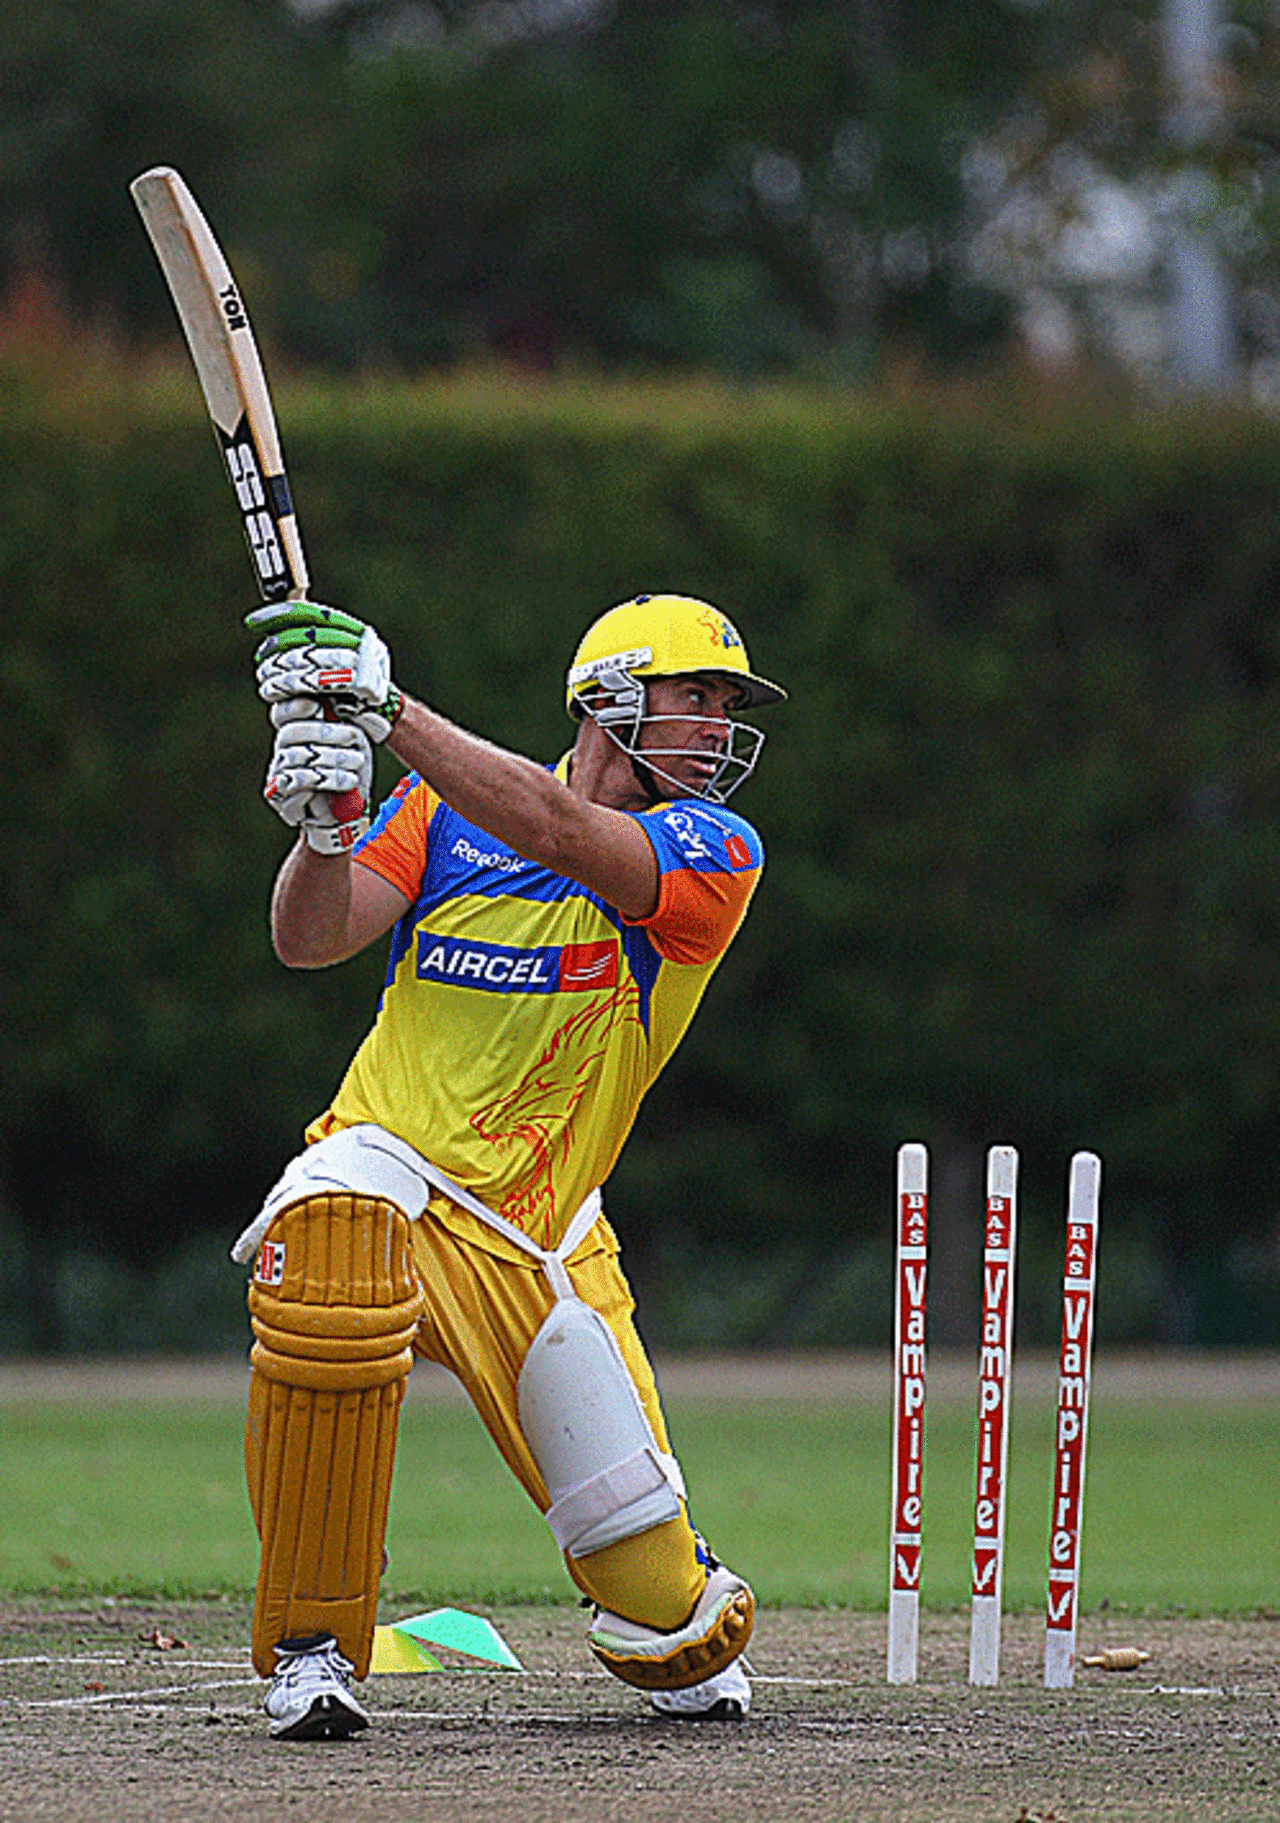 Matthew Hayden goes at one hard, Cape Town, April 16, 2009